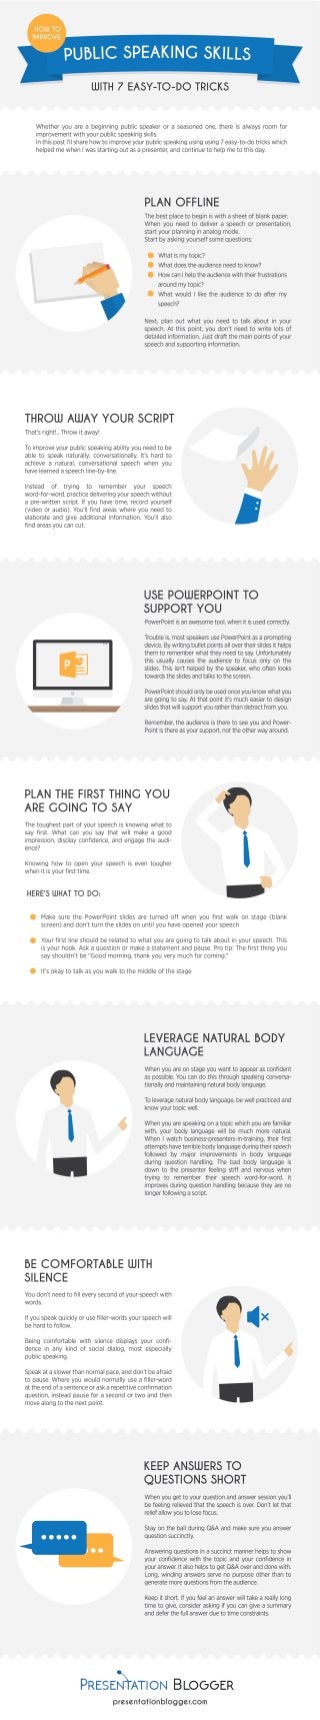 How to improve public speaking skills with 7 easy to-do tricks